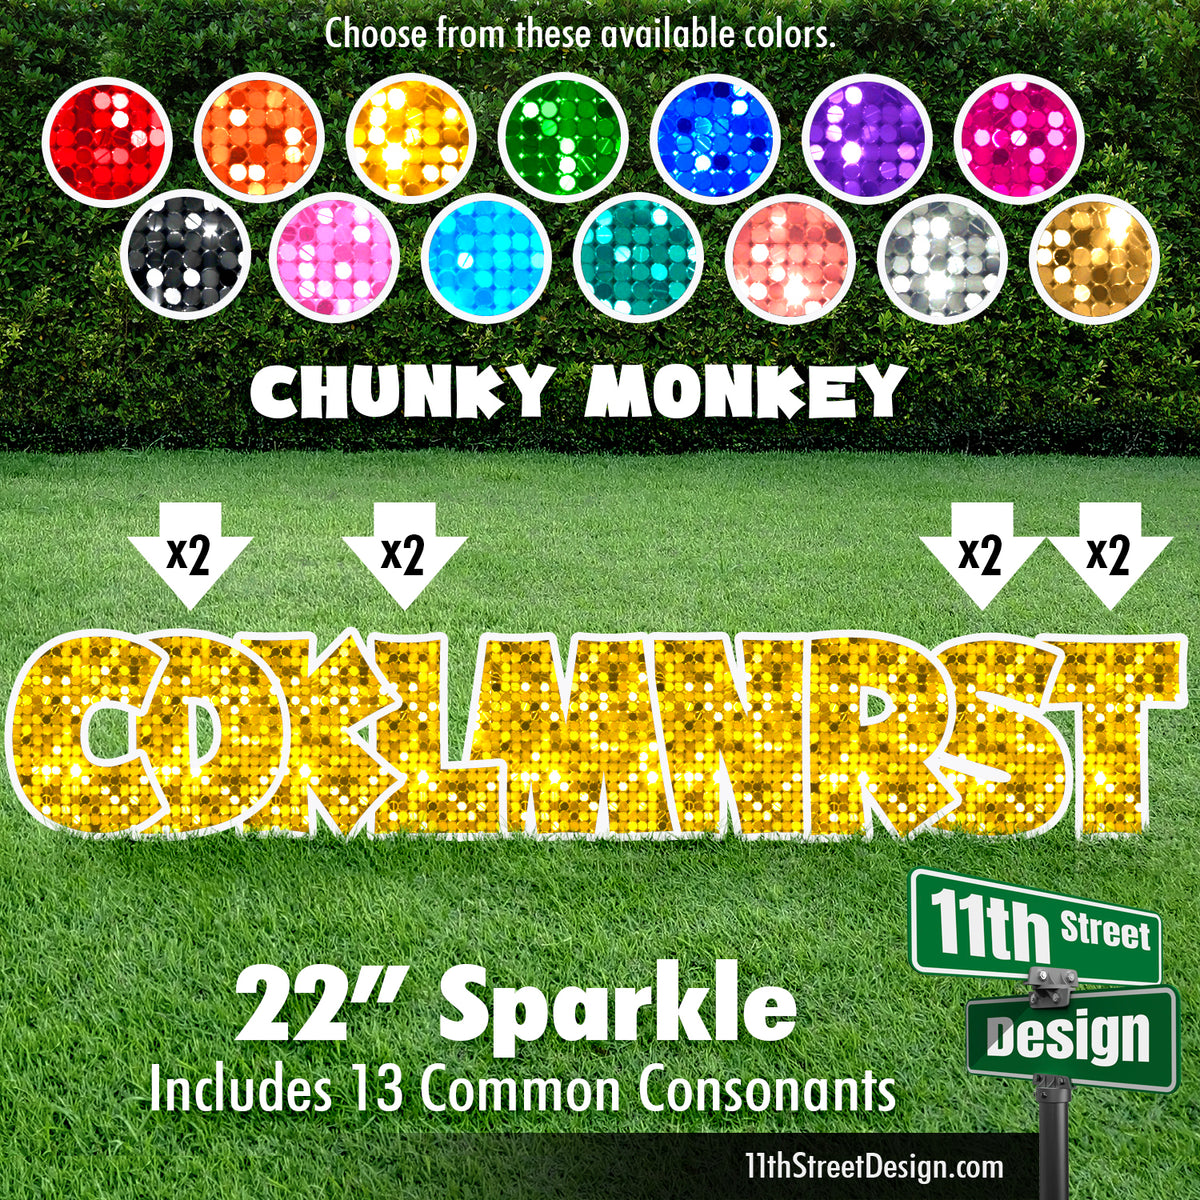 Sparkle 22&quot; Chunky Monkey Yard Card Set Includes 13 Common Consonants